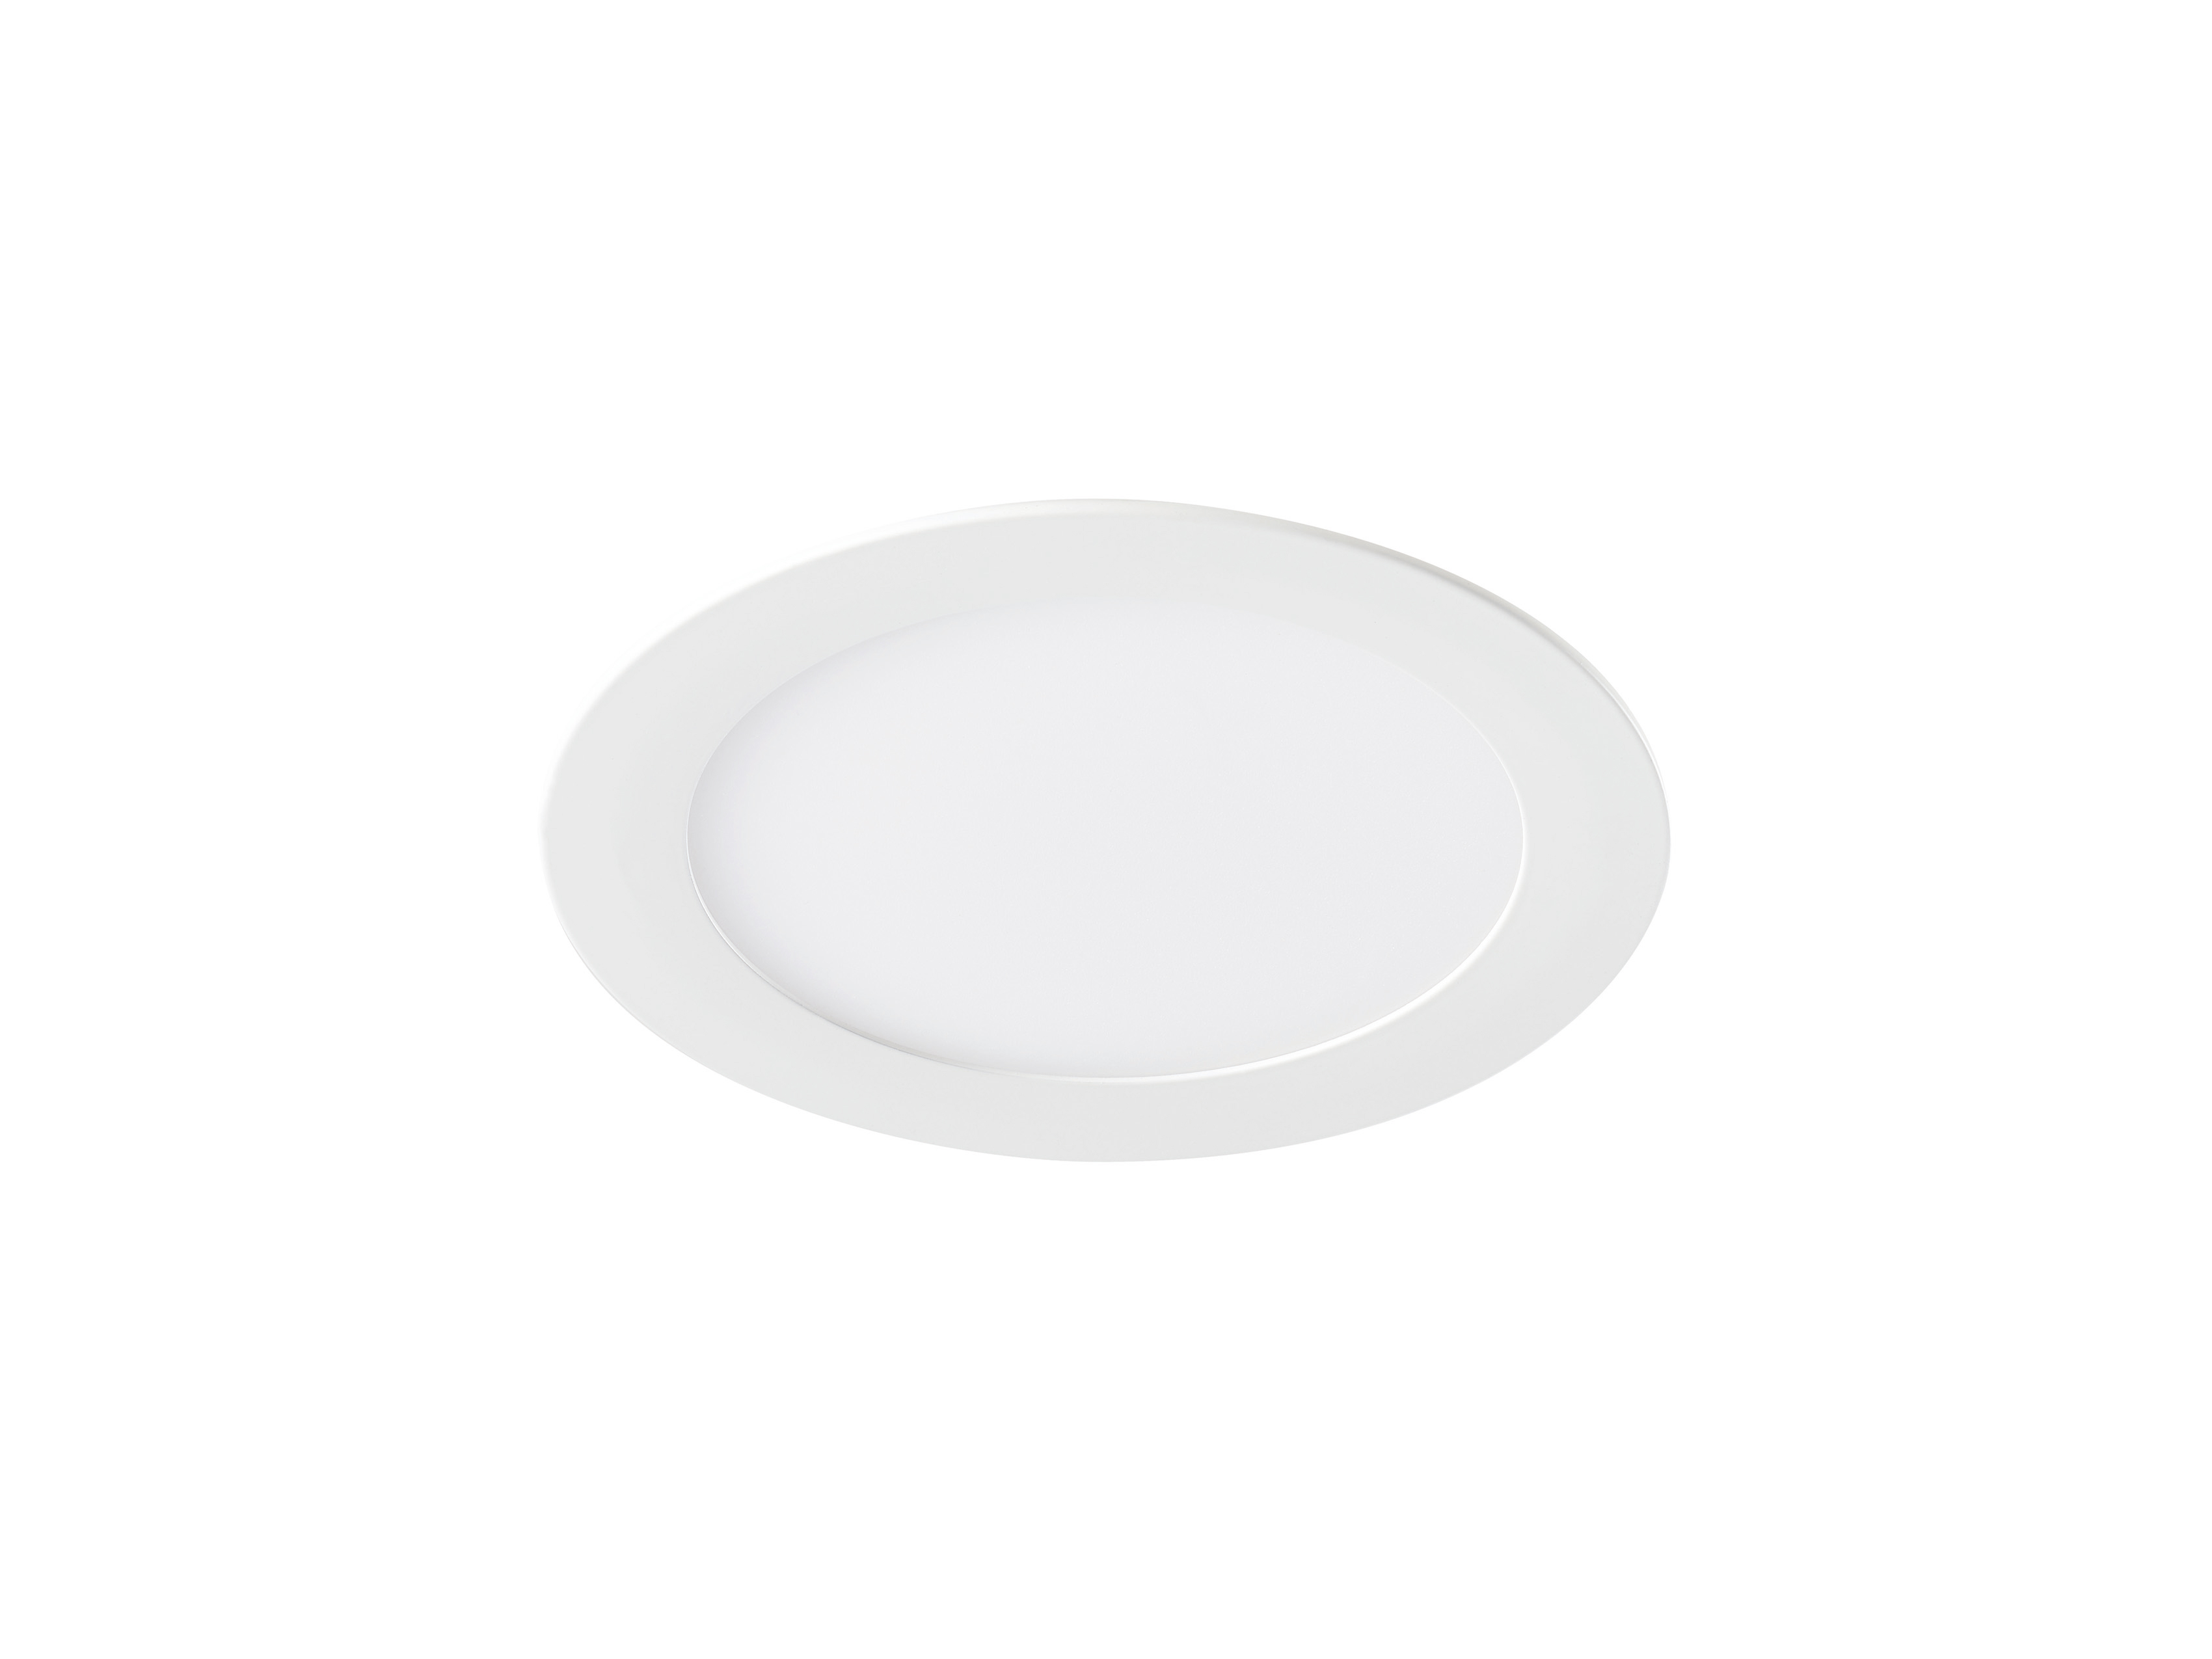 SylFlat LED Dimmable - Recessed - 0053308.jpg